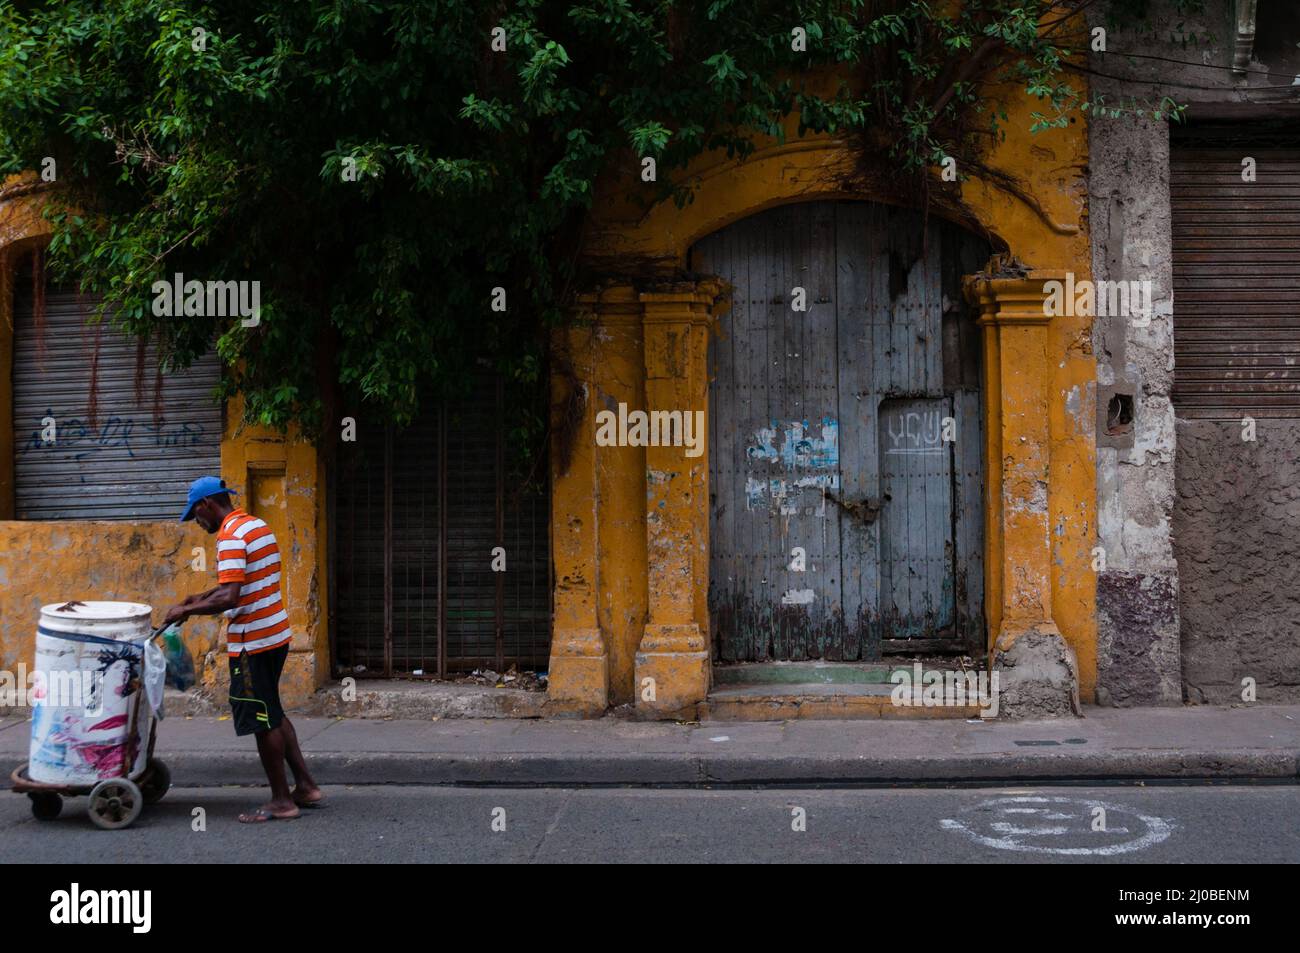 Man with cart on street in front of old colonial house Cartagena, Stock Photo